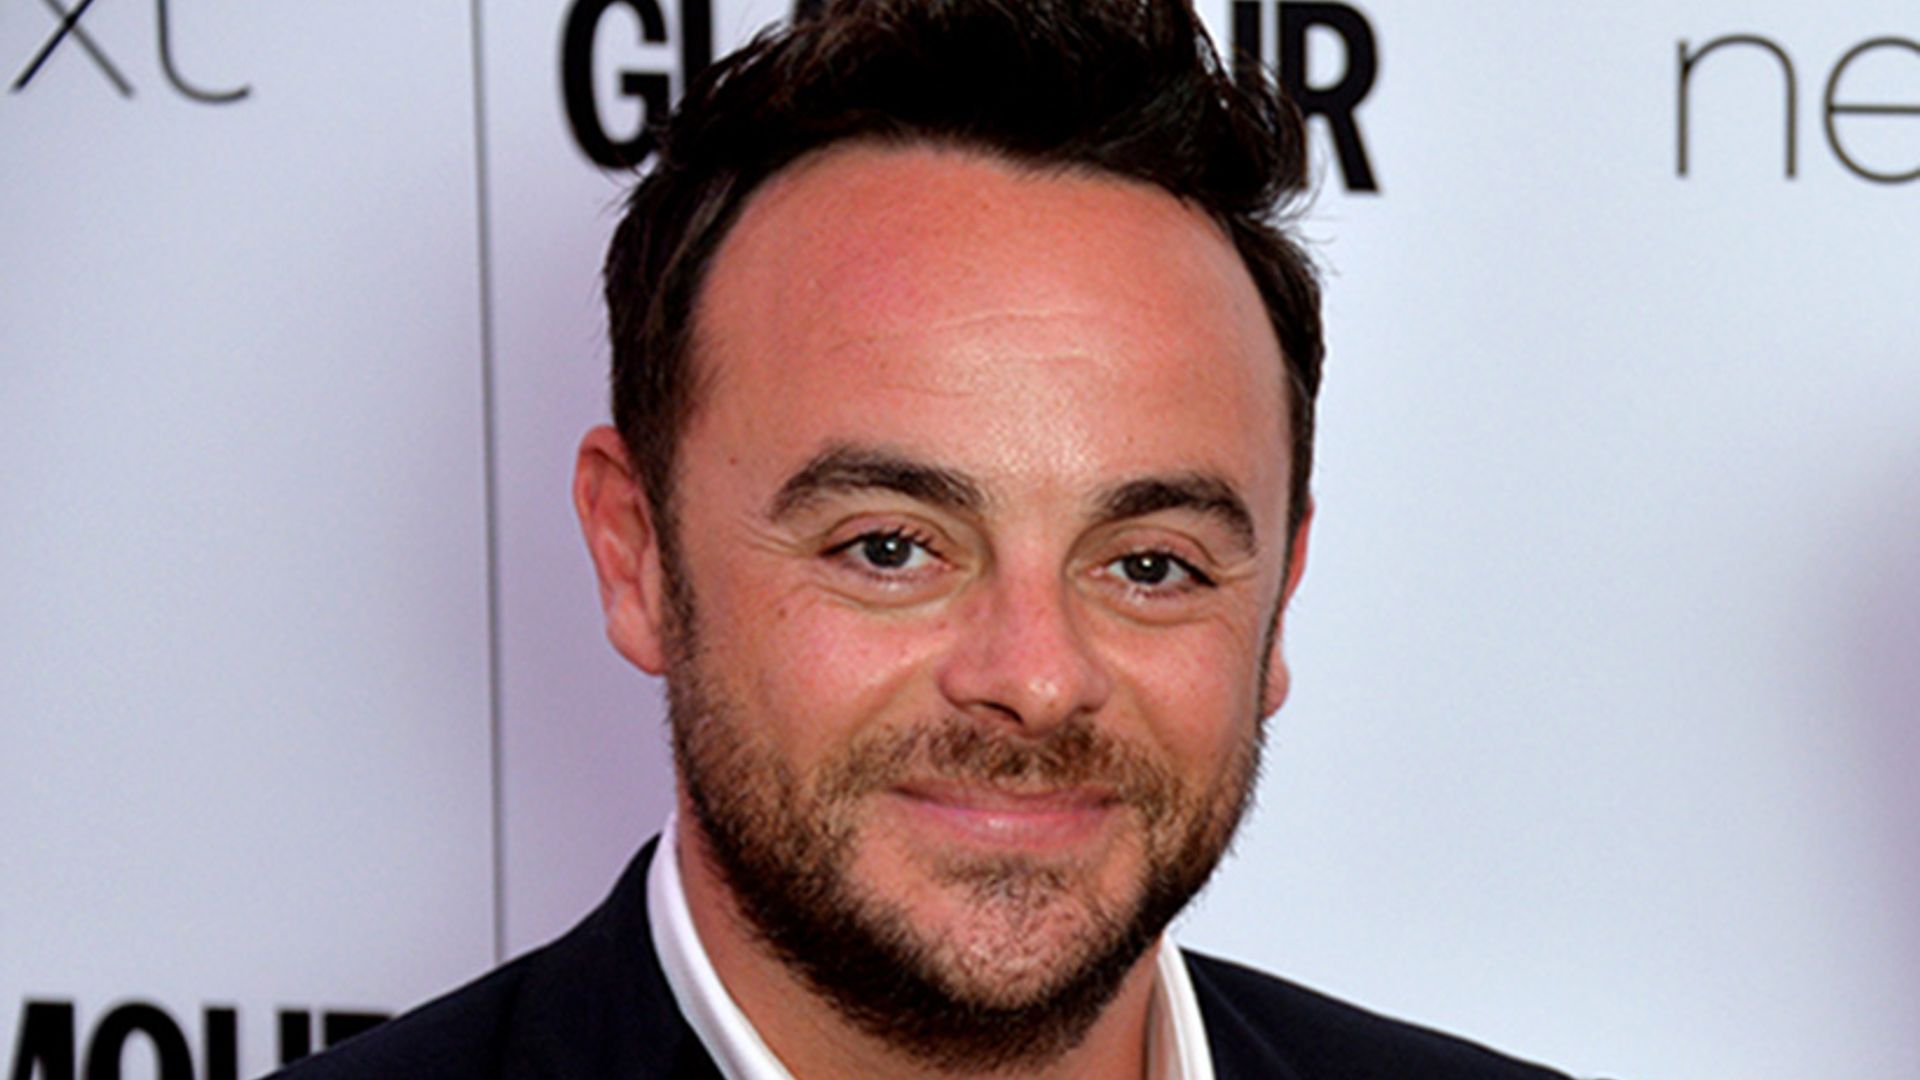 Fans support Ant McPartlin as he checks into rehab for anxiety and painkiller addiction